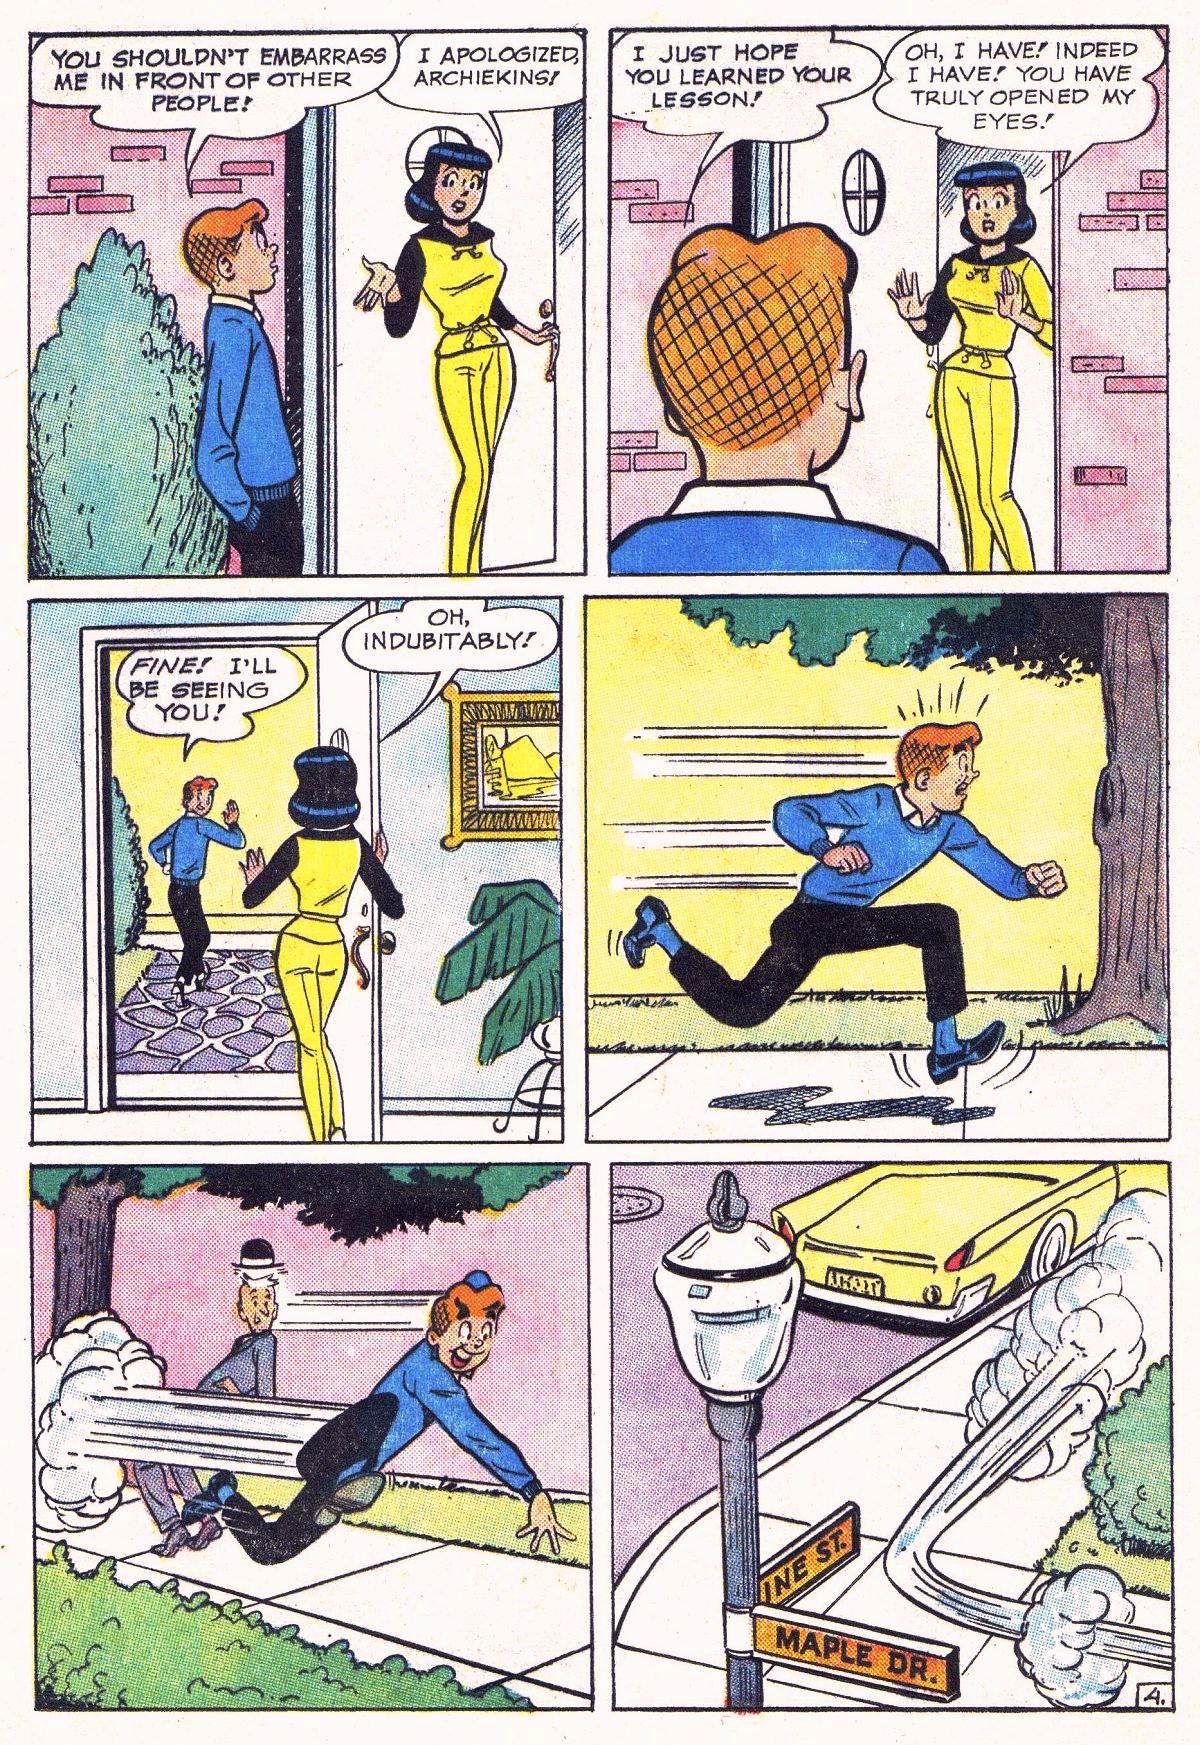 Archie (1960) 143 Page 32